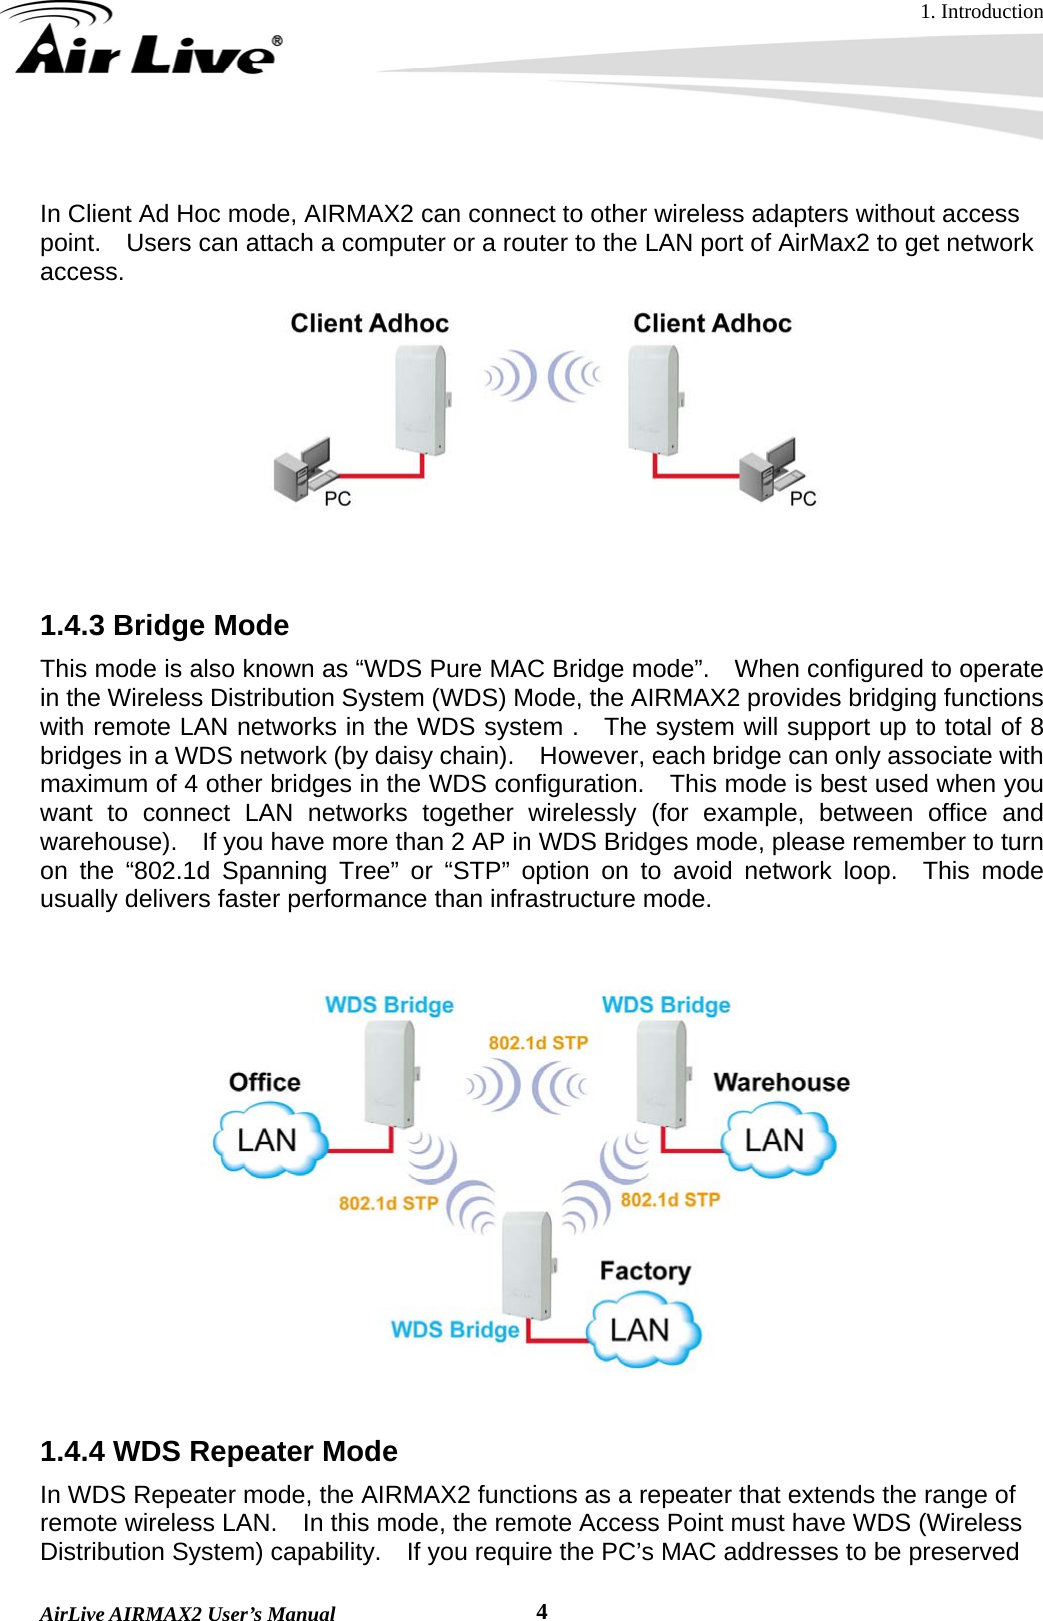 1. Introduction  AirLive AIRMAX2 User’s Manual  4 In Client Ad Hoc mode, AIRMAX2 can connect to other wireless adapters without access point.    Users can attach a computer or a router to the LAN port of AirMax2 to get network access.    1.4.3 Bridge Mode   This mode is also known as “WDS Pure MAC Bridge mode”.    When configured to operate in the Wireless Distribution System (WDS) Mode, the AIRMAX2 provides bridging functions with remote LAN networks in the WDS system .  The system will support up to total of 8 bridges in a WDS network (by daisy chain).    However, each bridge can only associate with maximum of 4 other bridges in the WDS configuration.    This mode is best used when you want to connect LAN networks together wirelessly (for example, between office and warehouse).    If you have more than 2 AP in WDS Bridges mode, please remember to turn on the “802.1d Spanning Tree” or “STP” option on to avoid network loop.  This mode usually delivers faster performance than infrastructure mode.        1.4.4 WDS Repeater Mode In WDS Repeater mode, the AIRMAX2 functions as a repeater that extends the range of remote wireless LAN.    In this mode, the remote Access Point must have WDS (Wireless Distribution System) capability.    If you require the PC’s MAC addresses to be preserved 